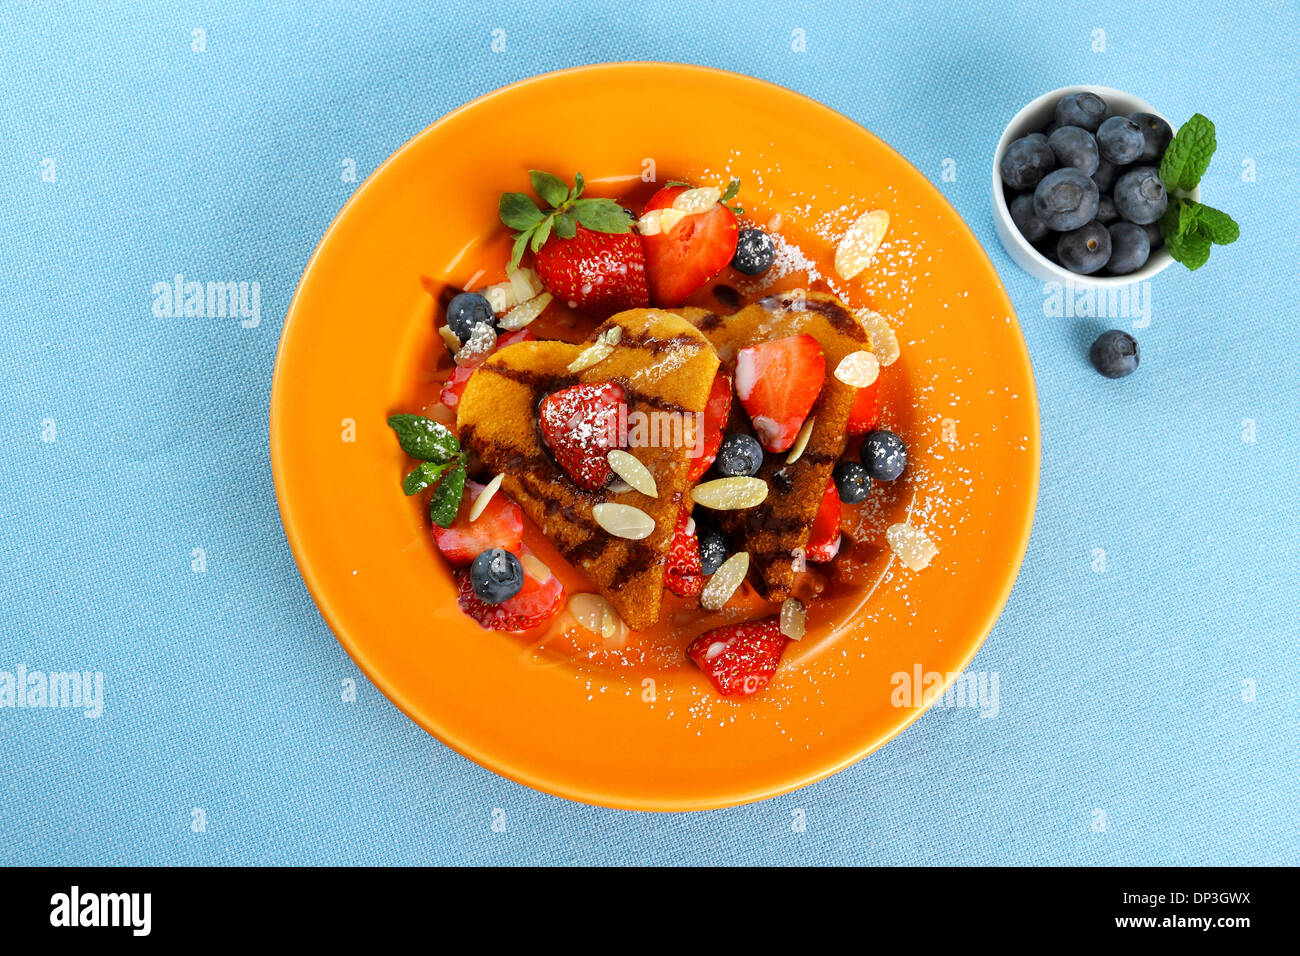 Two pancakes hearts with strawberry, almond slivers, blueberries, top view Stock Photo